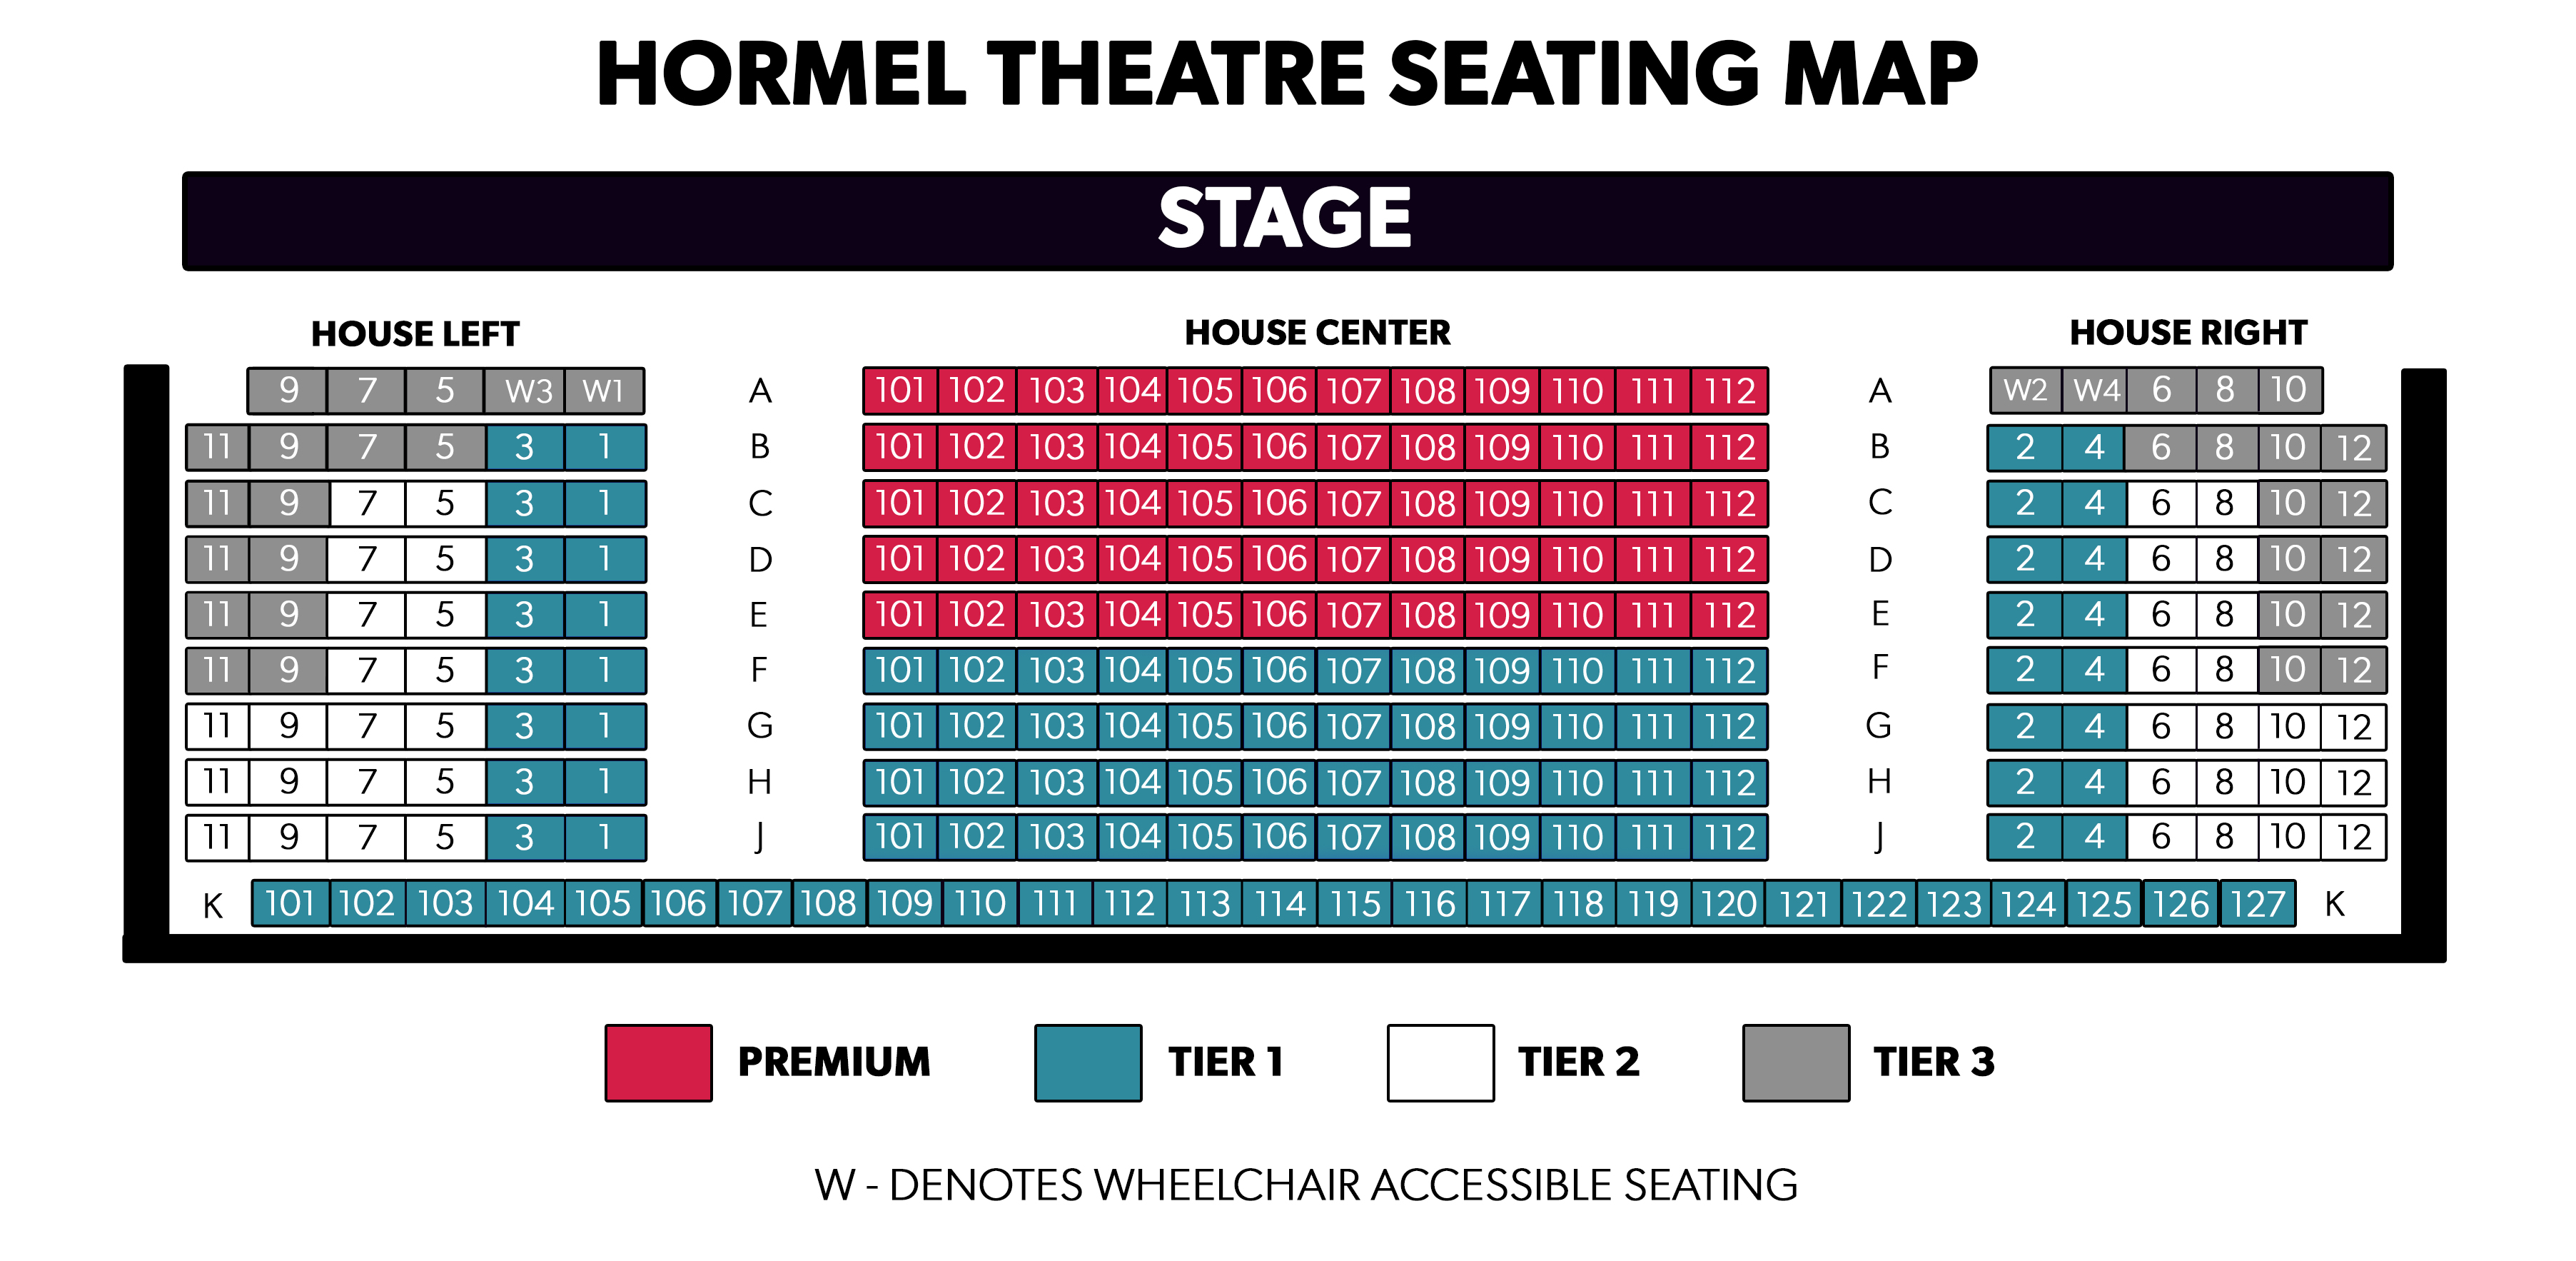 Hormel Theatre Seating Map